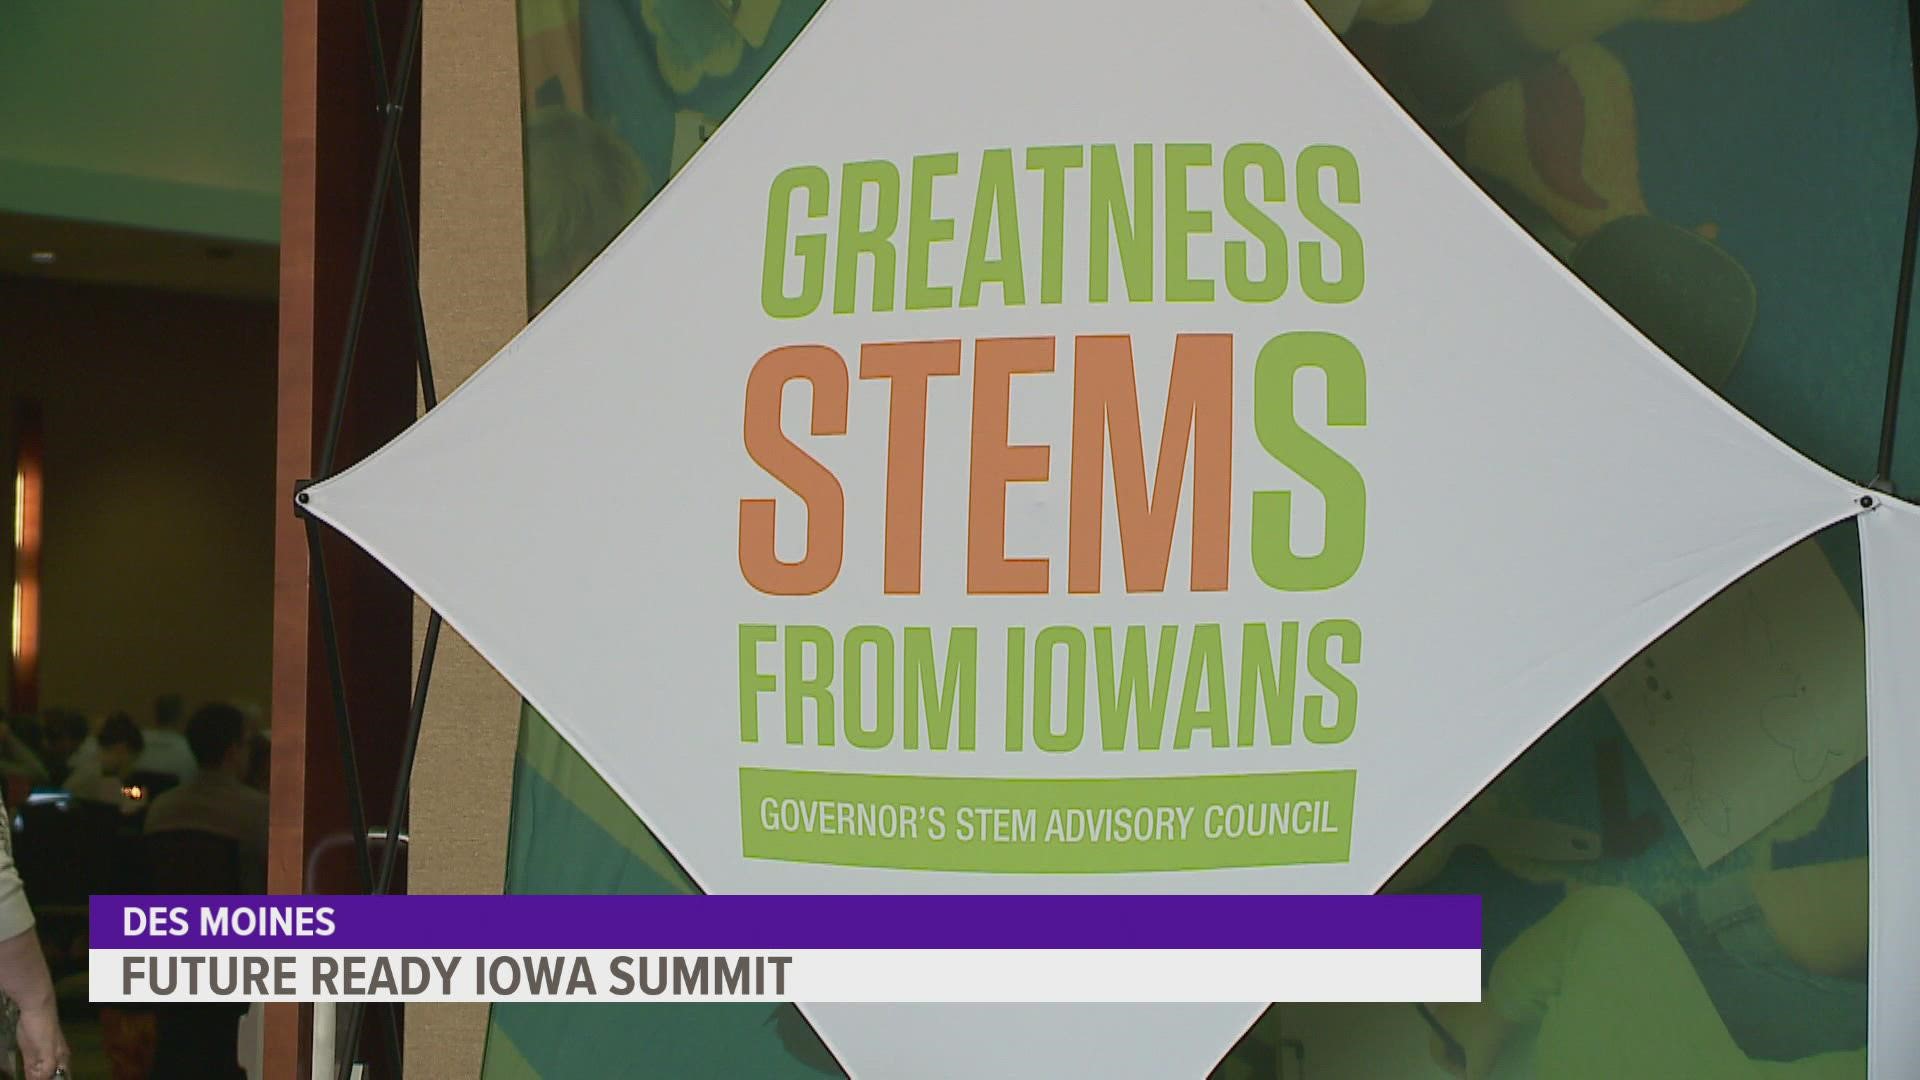 The event brought elected officials, leaders from business and industry, education, nonprofits, students and others together to discuss critical aspects of STEM.